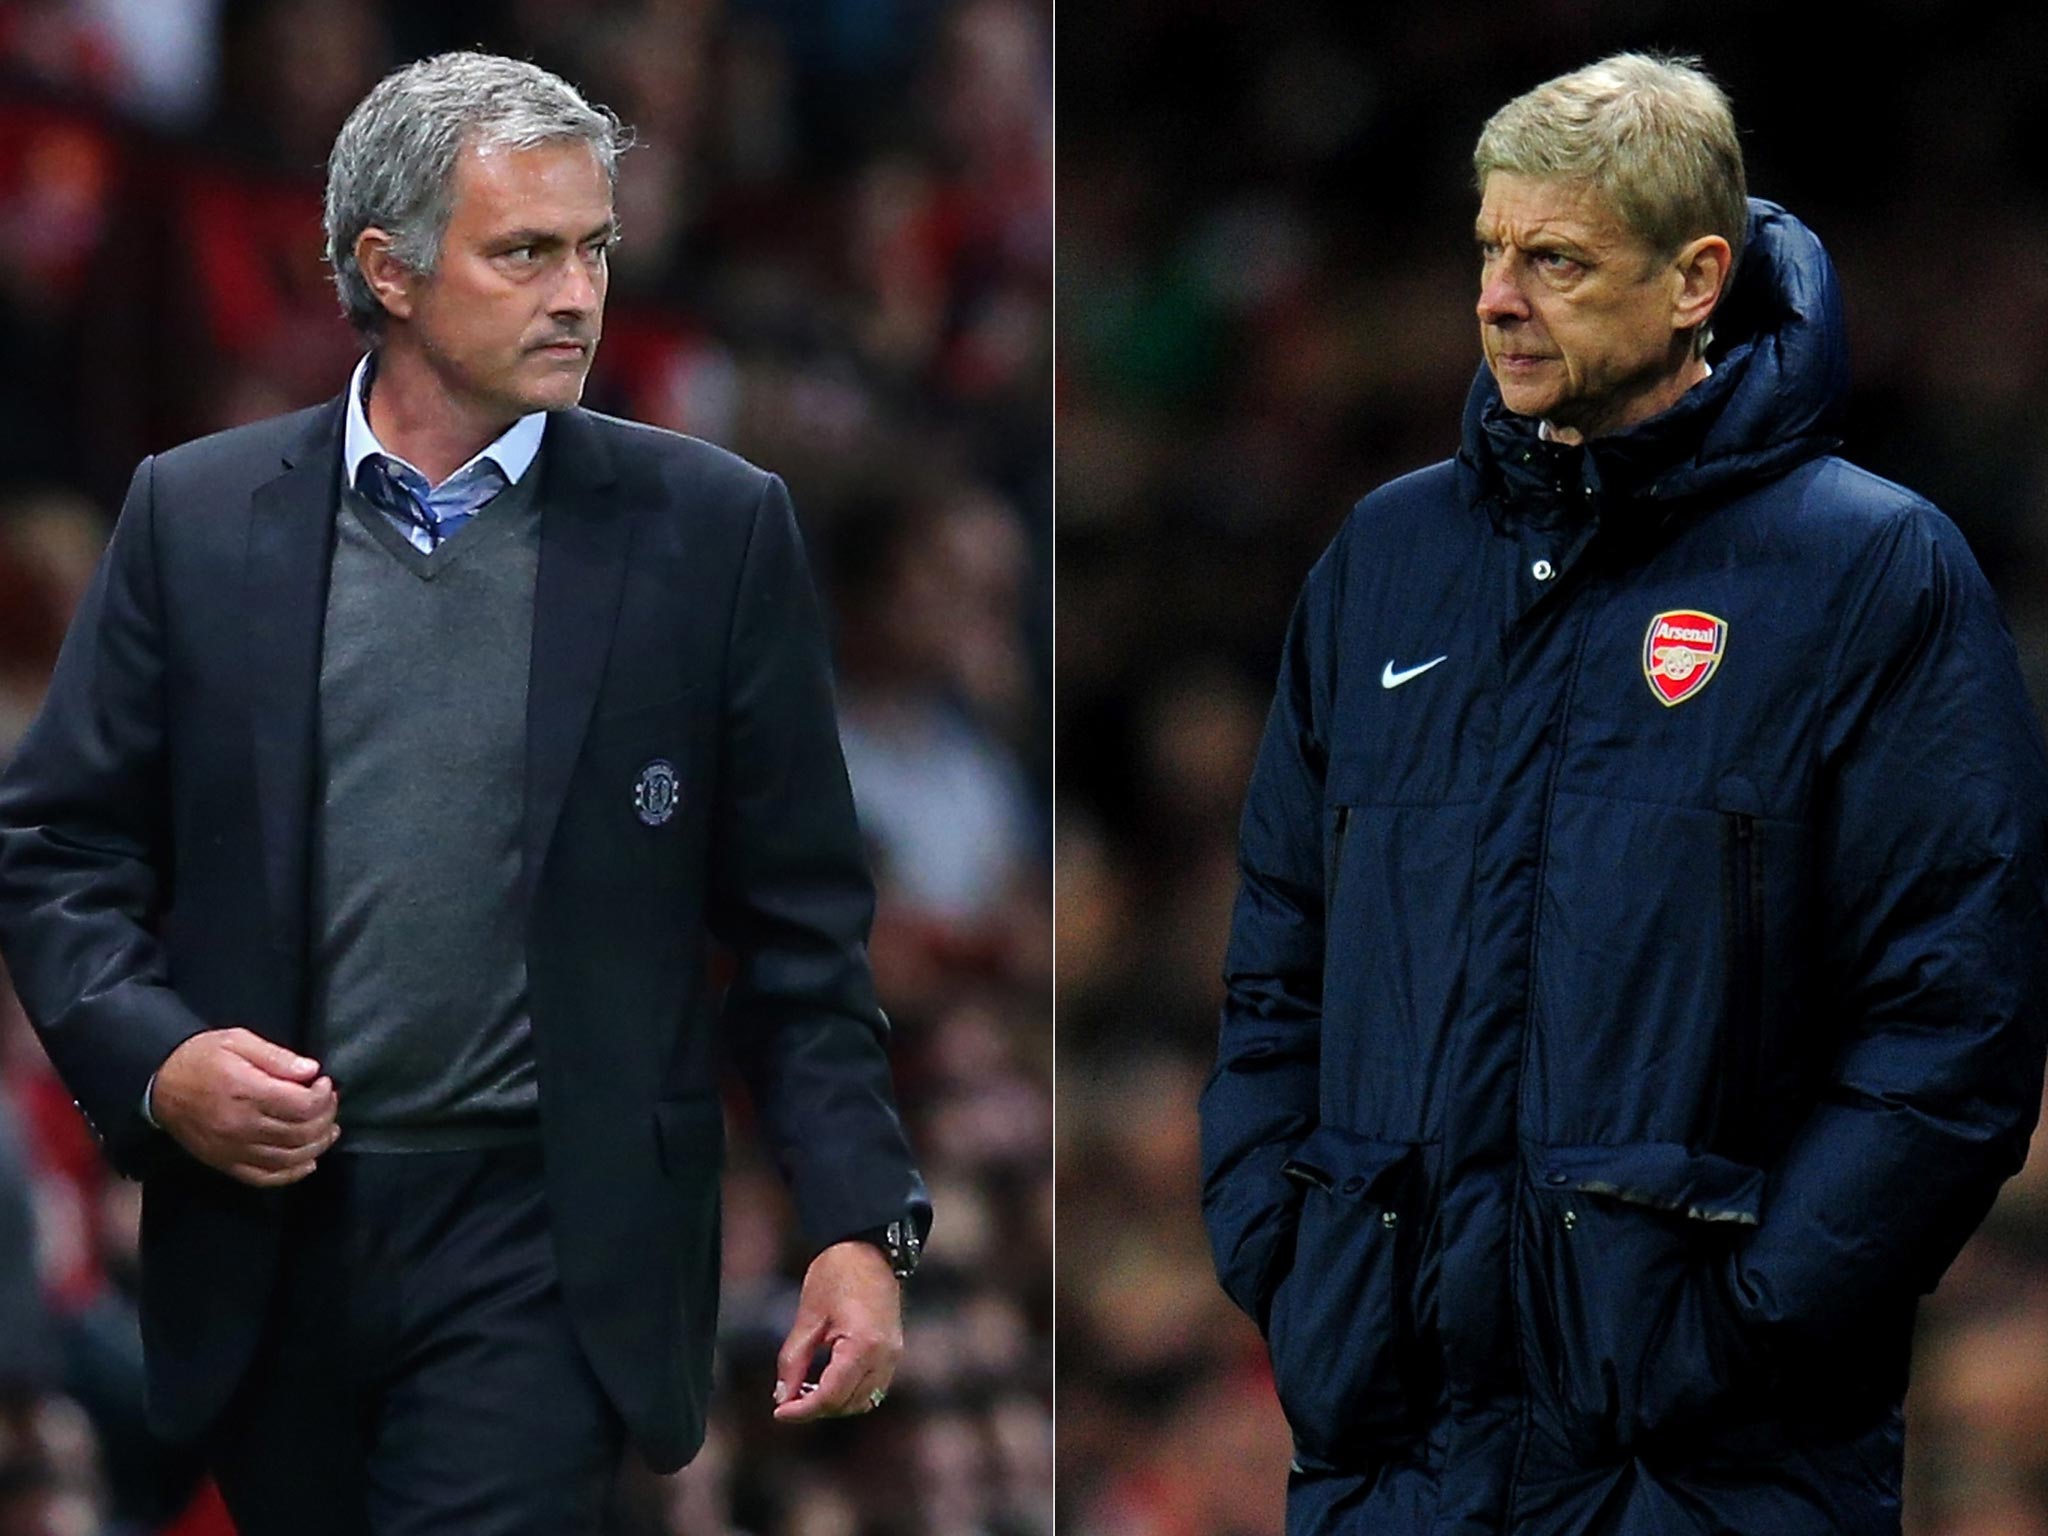 Jose Mourinho and Arsene Wenger are in a war of words